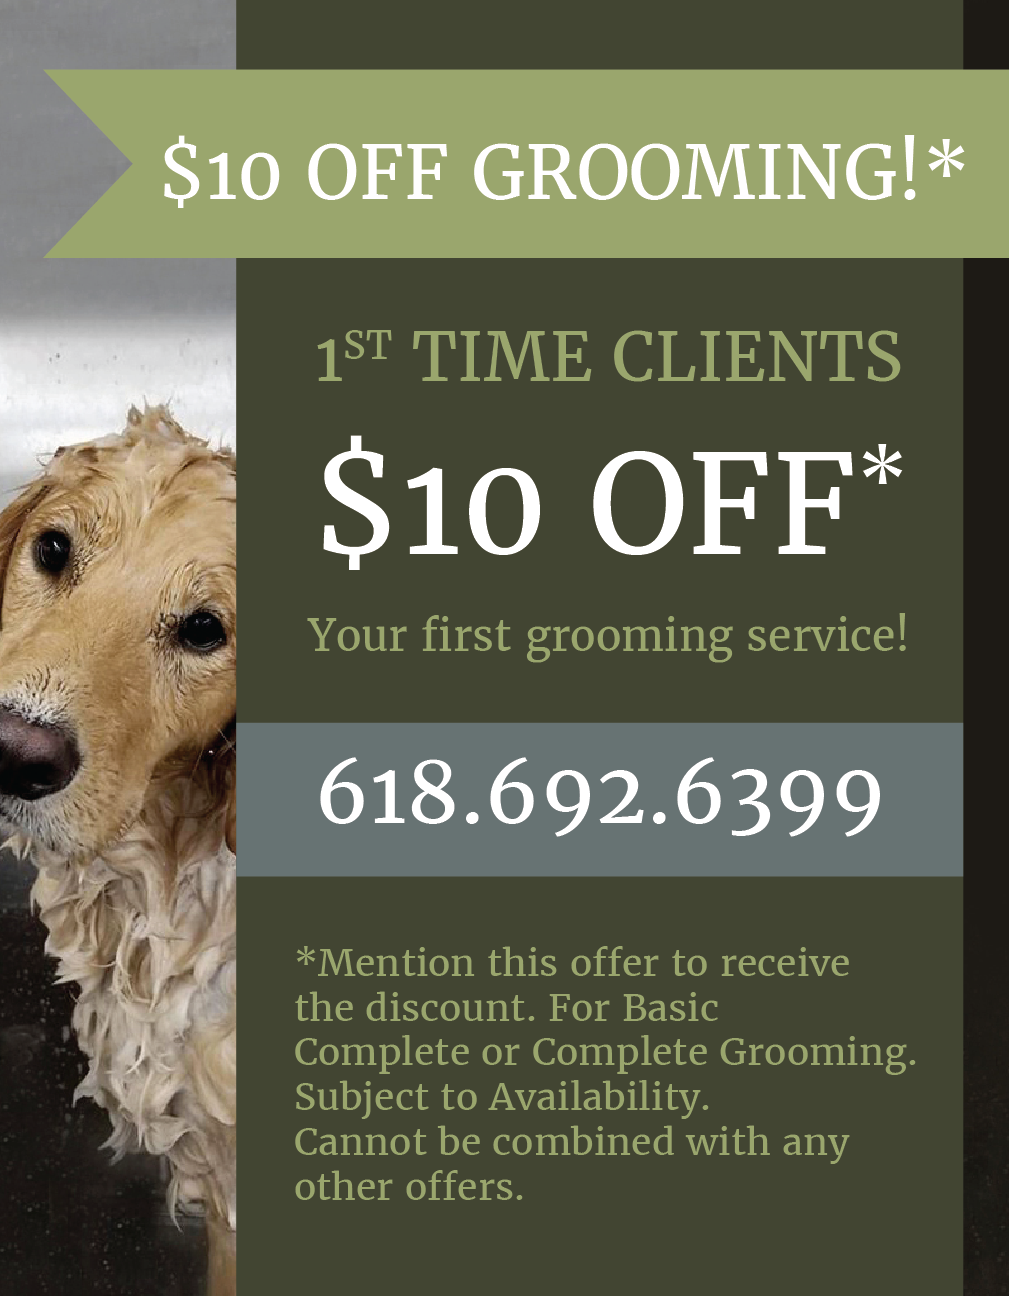 Special Grooming Offer from LaBest Pet Resort and Spa